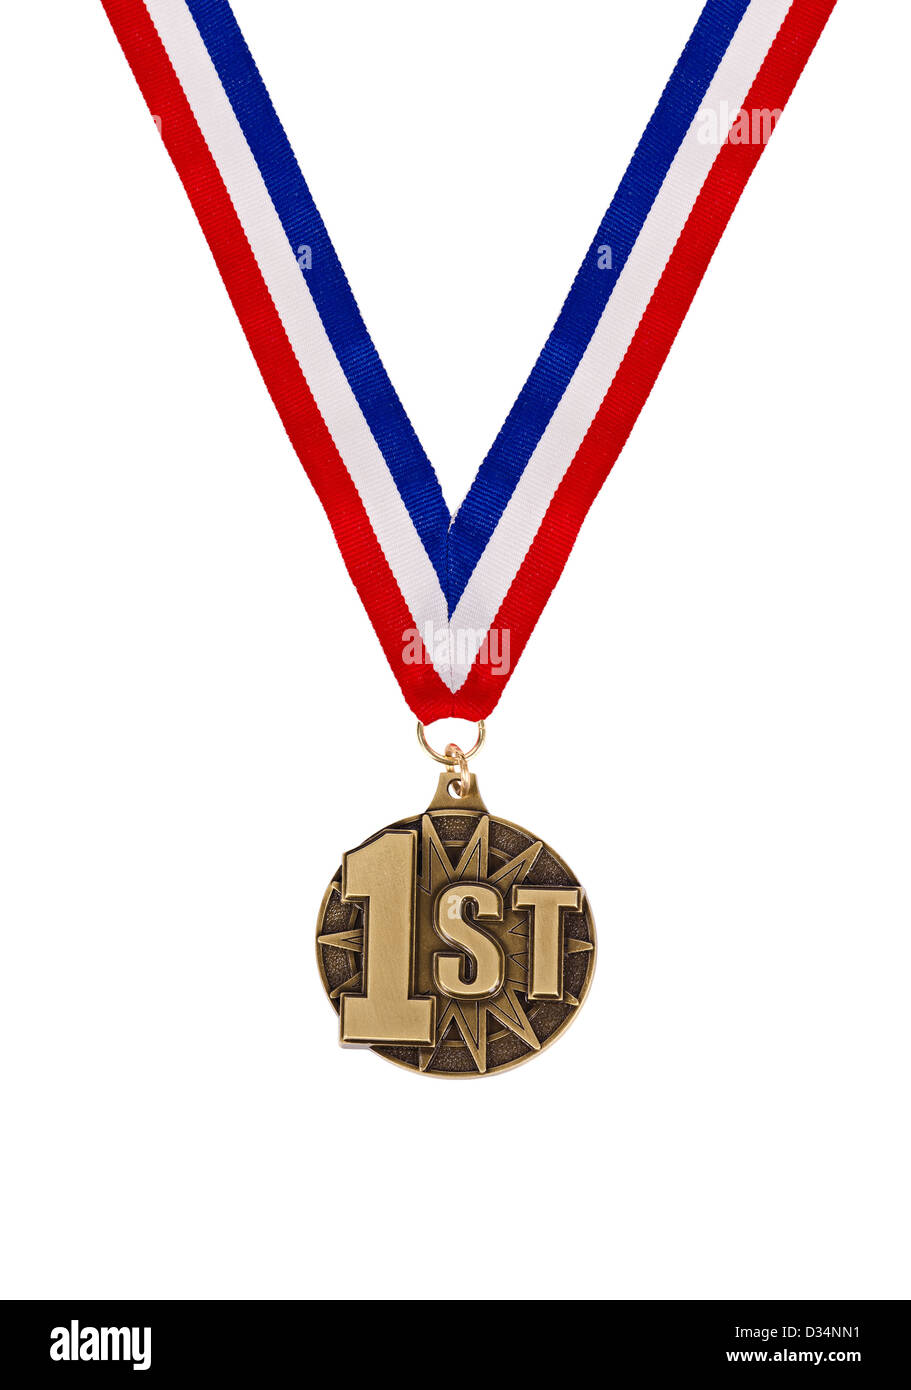 Winning first place medal with tricolor ribbon Stock Photo